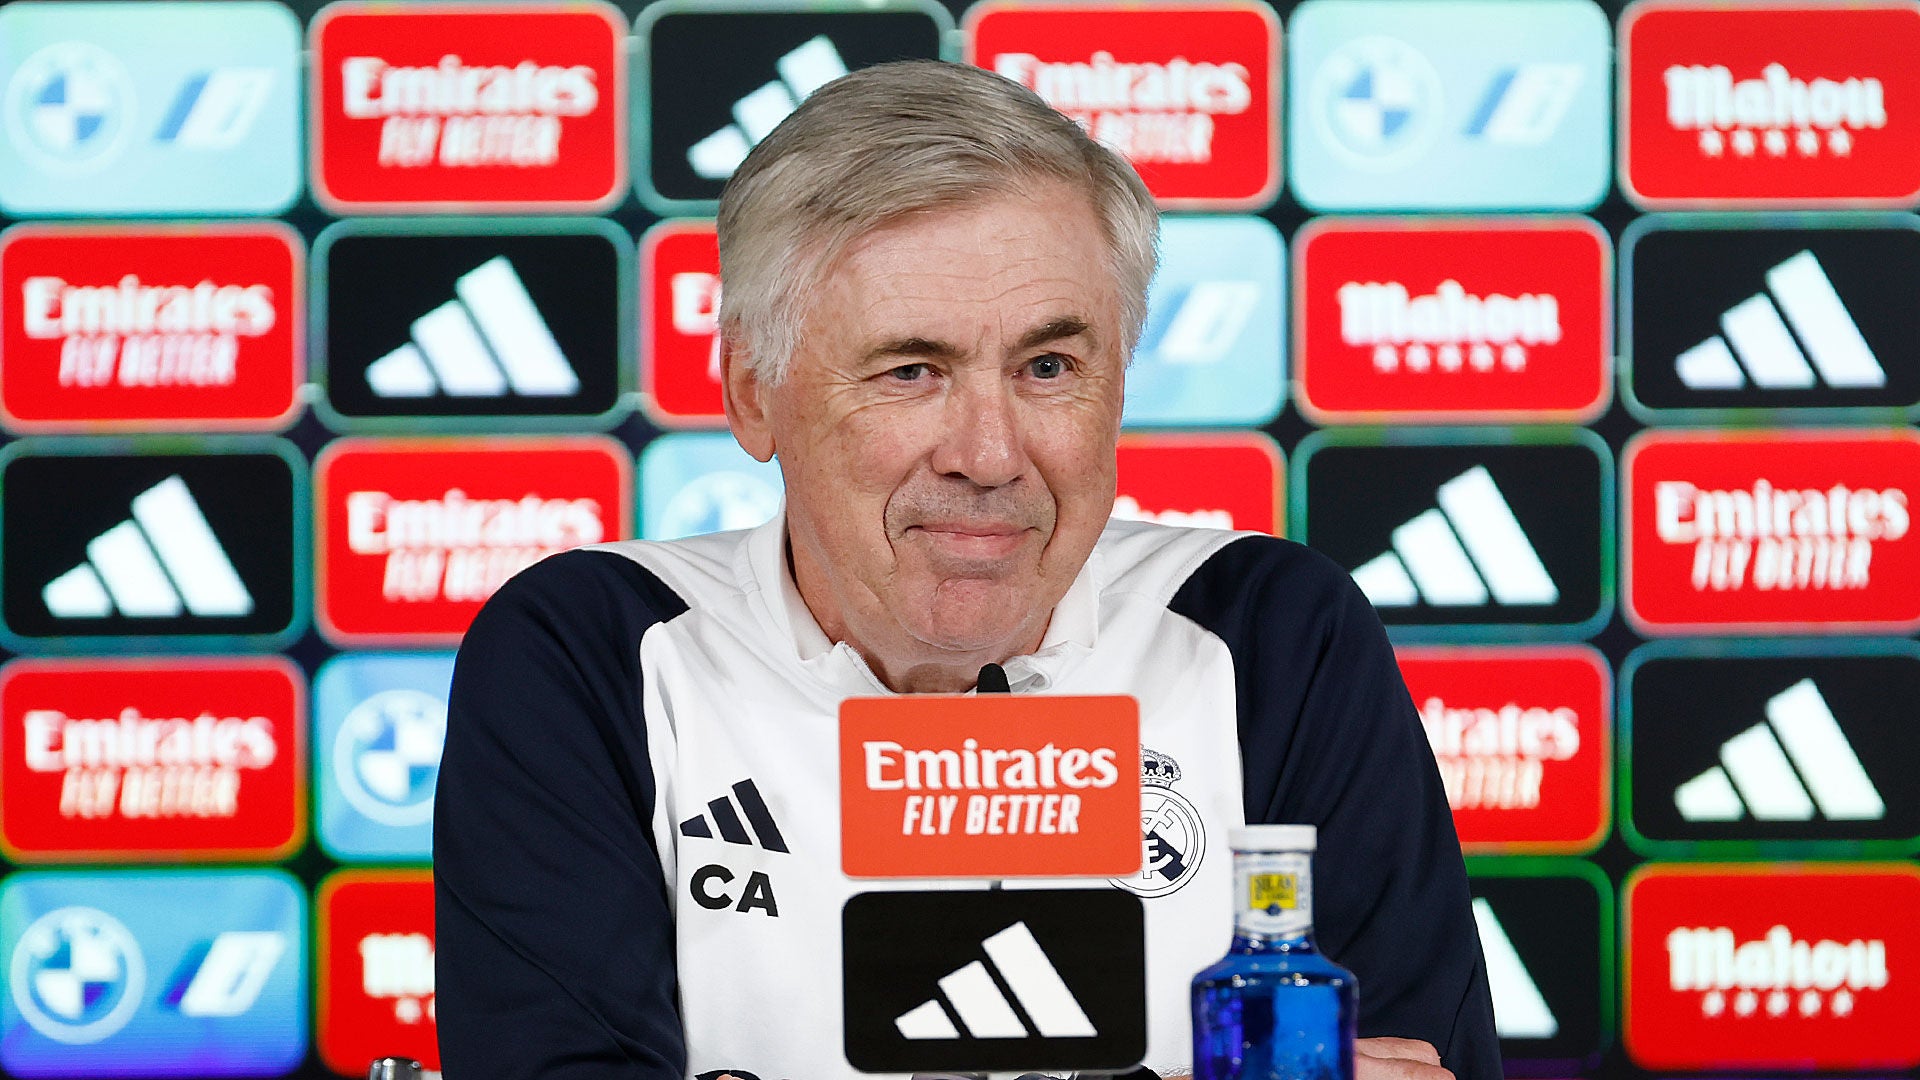 Ancelotti: “It's a key game for the league and the season”